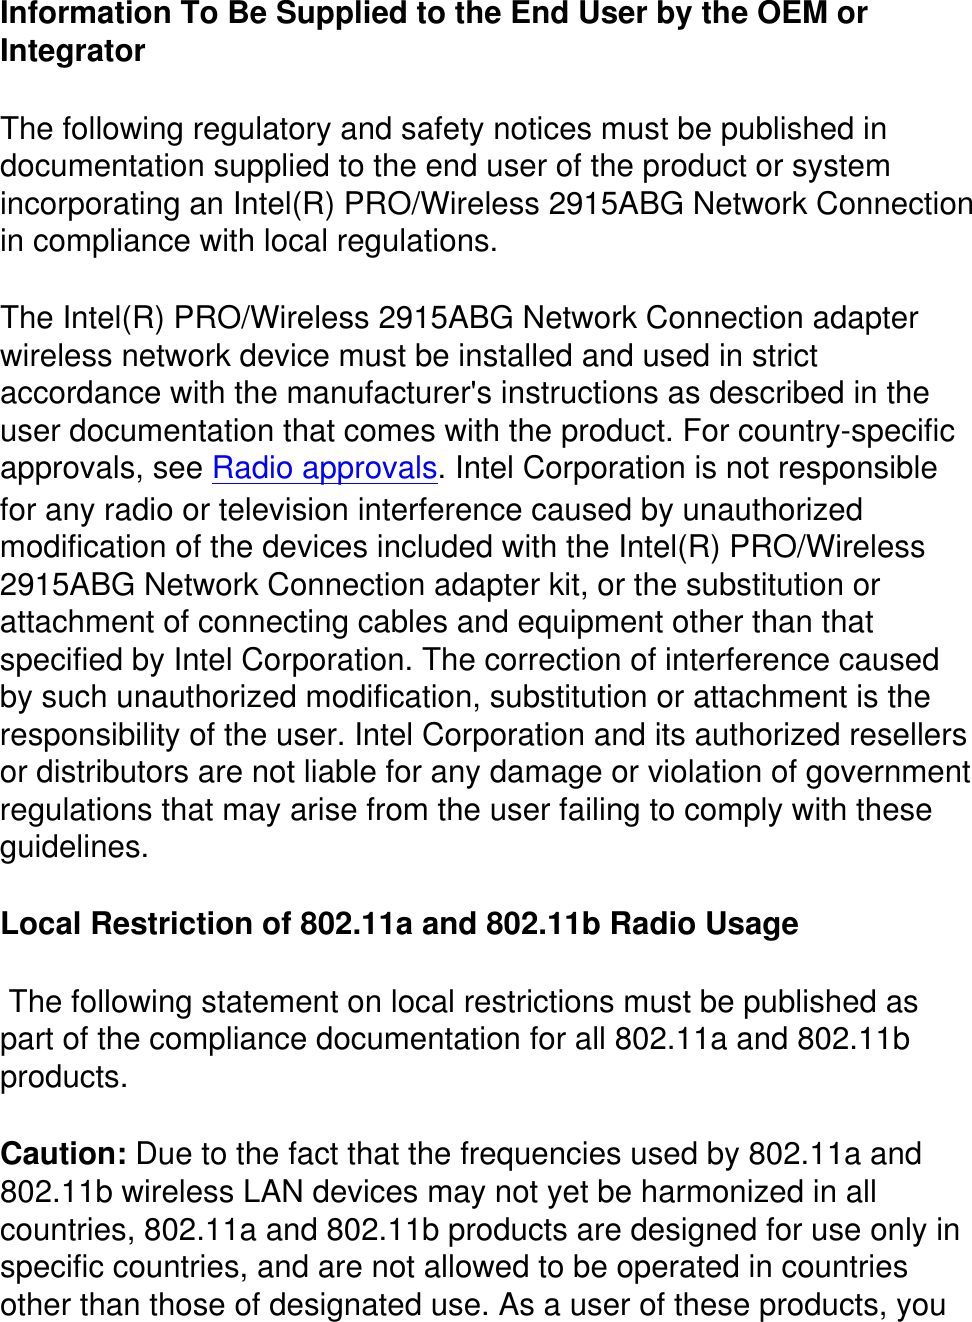 Information To Be Supplied to the End User by the OEM or Integrator The following regulatory and safety notices must be published in documentation supplied to the end user of the product or system incorporating an Intel(R) PRO/Wireless 2915ABG Network Connection in compliance with local regulations. The Intel(R) PRO/Wireless 2915ABG Network Connection adapter wireless network device must be installed and used in strict accordance with the manufacturer&apos;s instructions as described in the user documentation that comes with the product. For country-specific approvals, see Radio approvals. Intel Corporation is not responsible for any radio or television interference caused by unauthorized modification of the devices included with the Intel(R) PRO/Wireless 2915ABG Network Connection adapter kit, or the substitution or attachment of connecting cables and equipment other than that specified by Intel Corporation. The correction of interference caused by such unauthorized modification, substitution or attachment is the responsibility of the user. Intel Corporation and its authorized resellers or distributors are not liable for any damage or violation of government regulations that may arise from the user failing to comply with these guidelines.Local Restriction of 802.11a and 802.11b Radio Usage  The following statement on local restrictions must be published as part of the compliance documentation for all 802.11a and 802.11b products. Caution: Due to the fact that the frequencies used by 802.11a and 802.11b wireless LAN devices may not yet be harmonized in all countries, 802.11a and 802.11b products are designed for use only in specific countries, and are not allowed to be operated in countries other than those of designated use. As a user of these products, you 